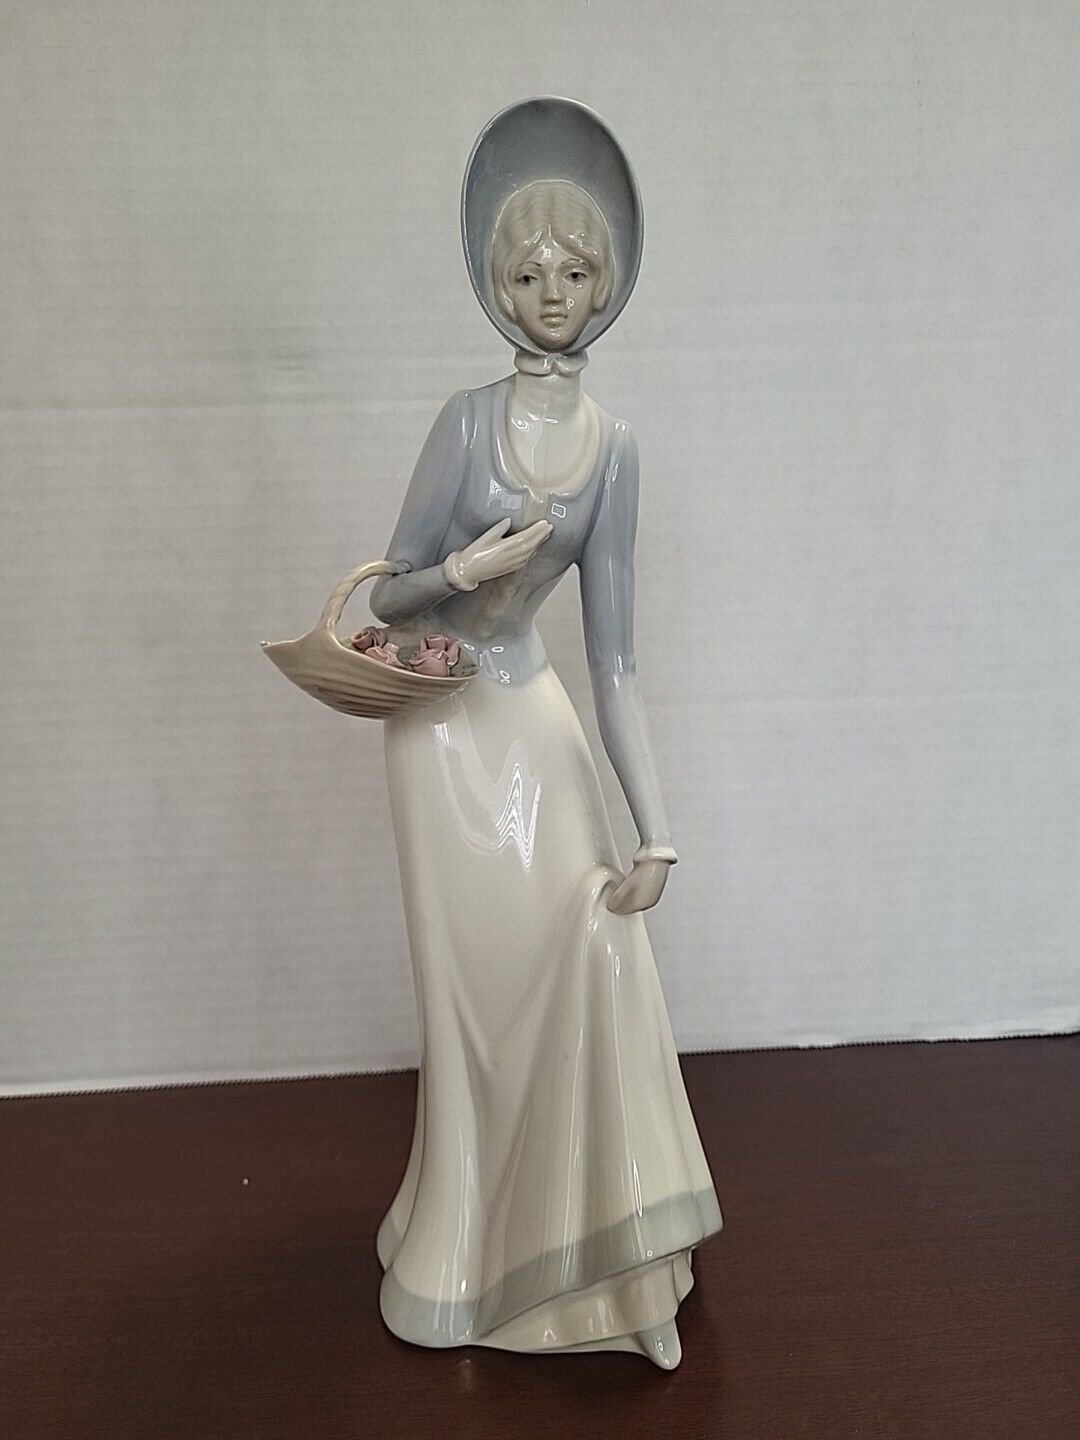 Porcelain Figurine Lady in Bonnet w/ Basket To the Market Spain Miguel Requena